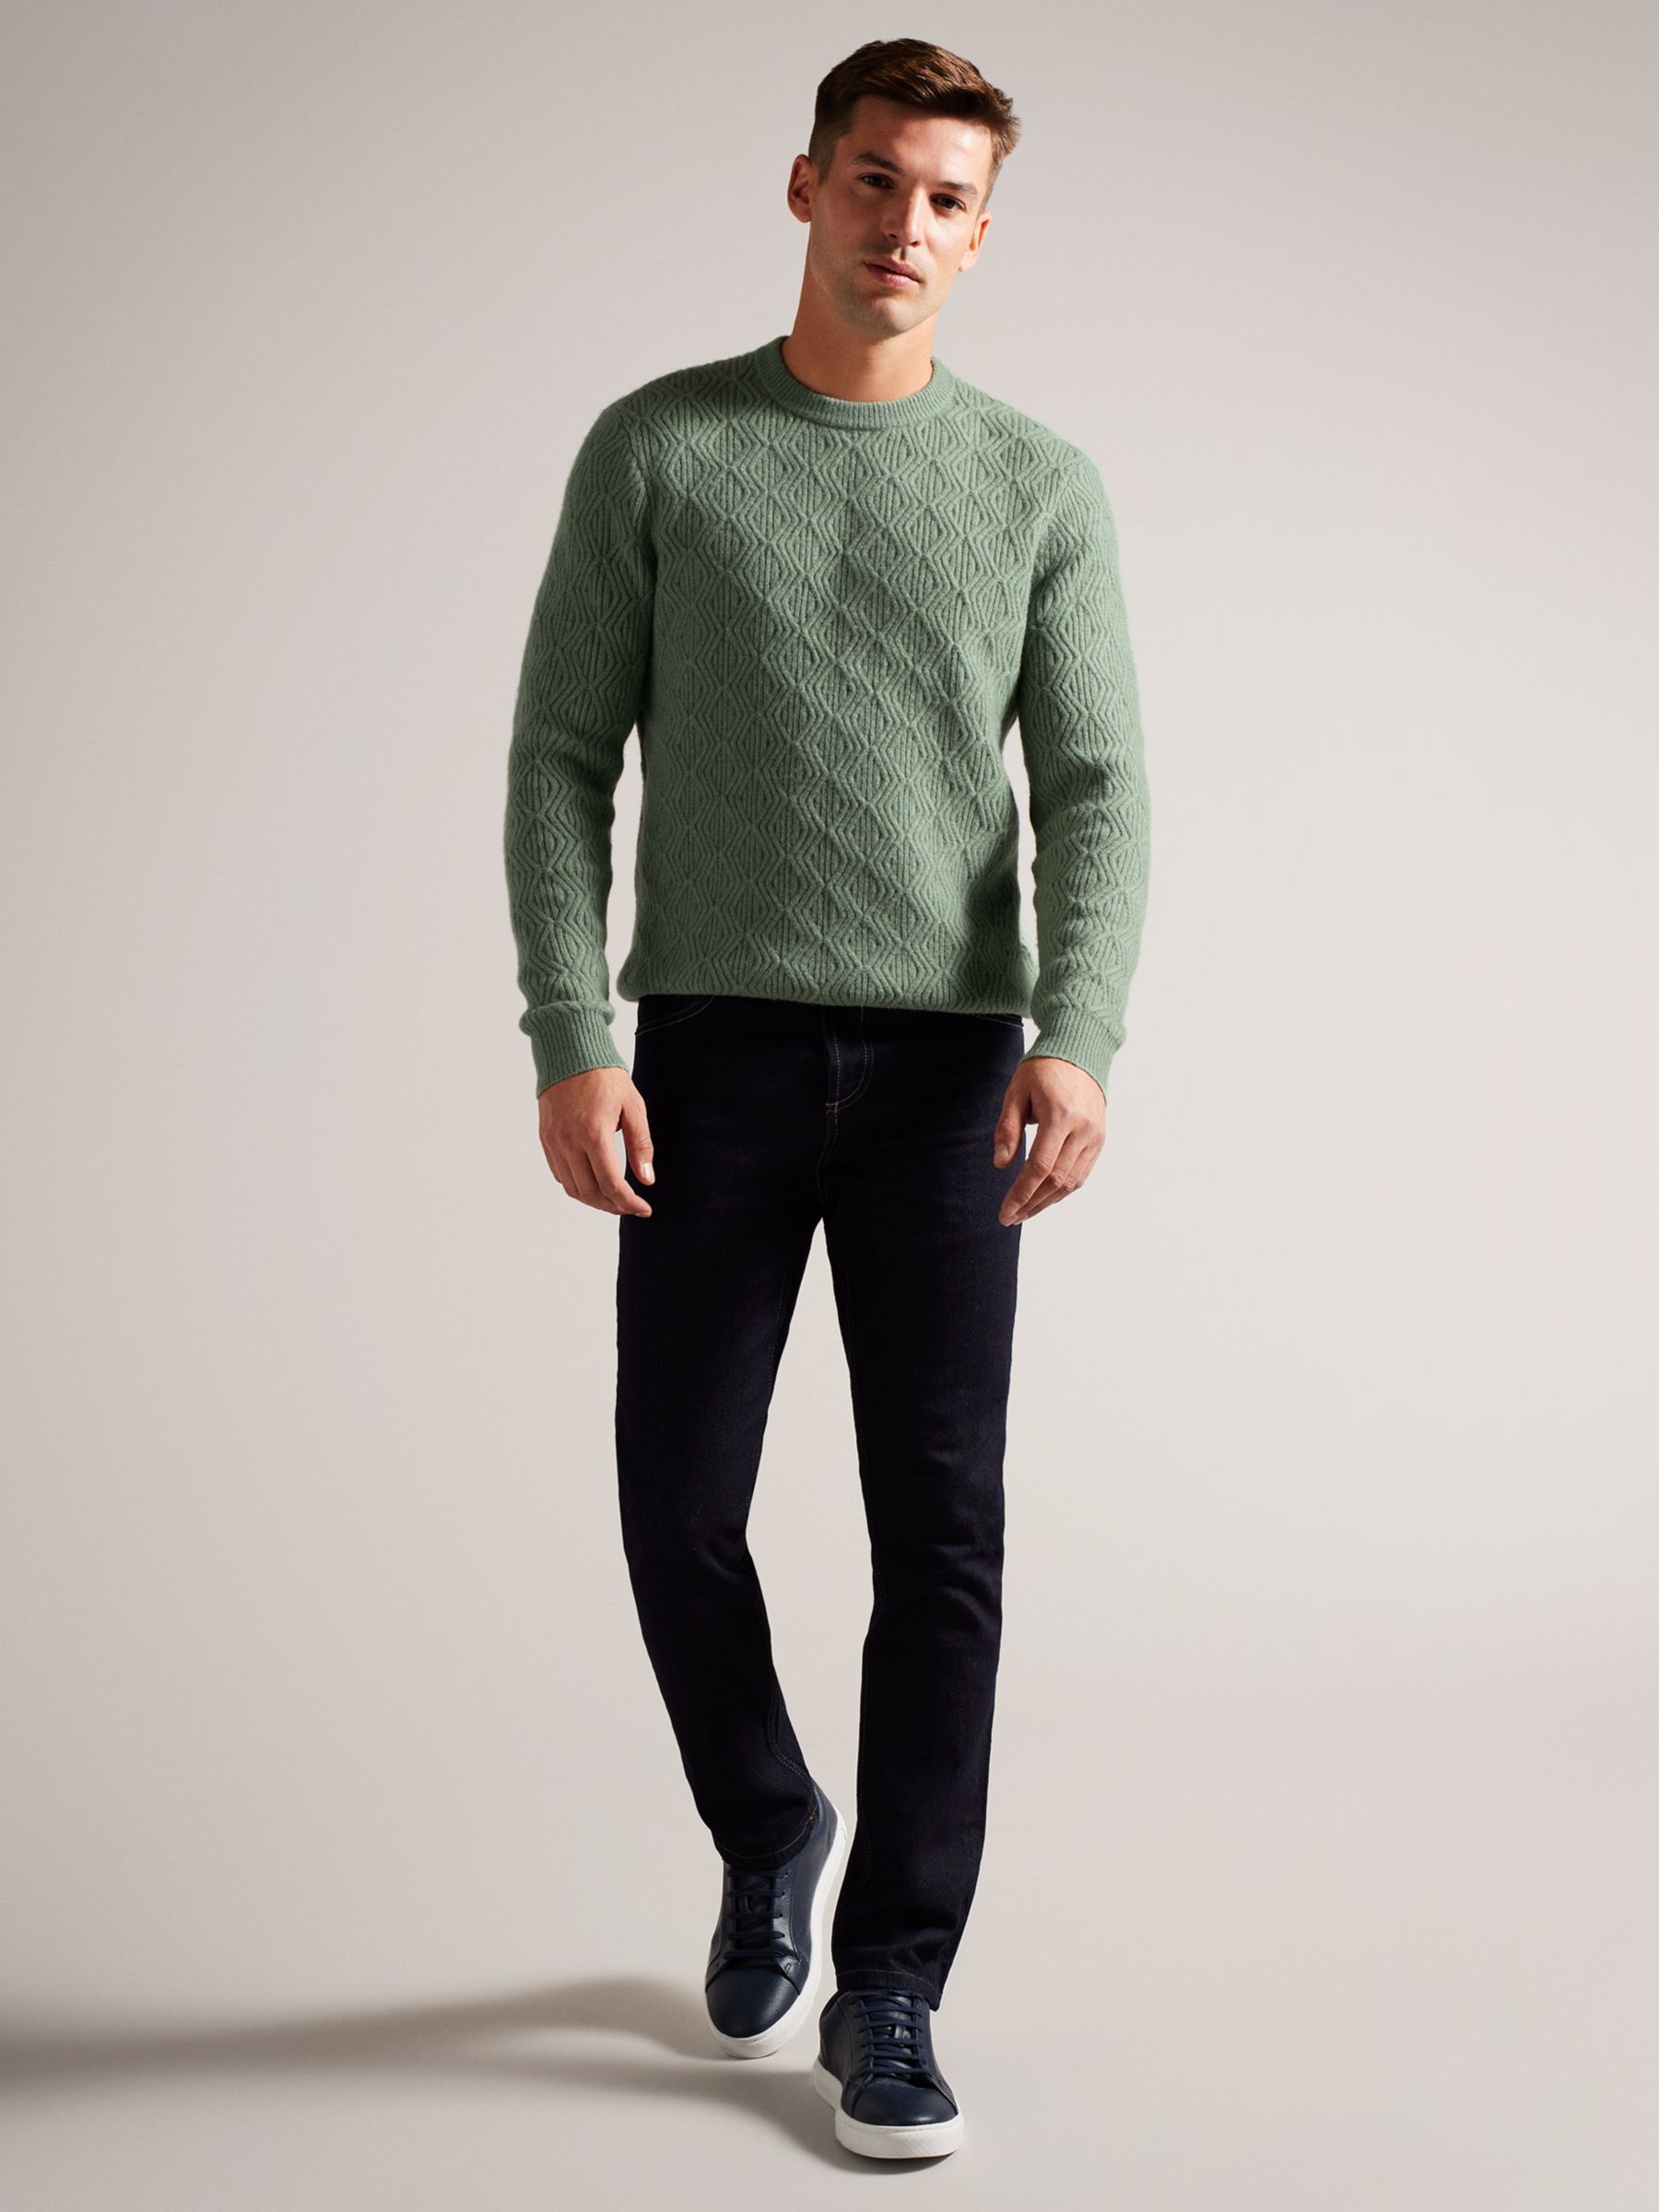 Ted Baker Atchet Long Sleeve Textured Cable Crew Neck Jumper, Light Green, L